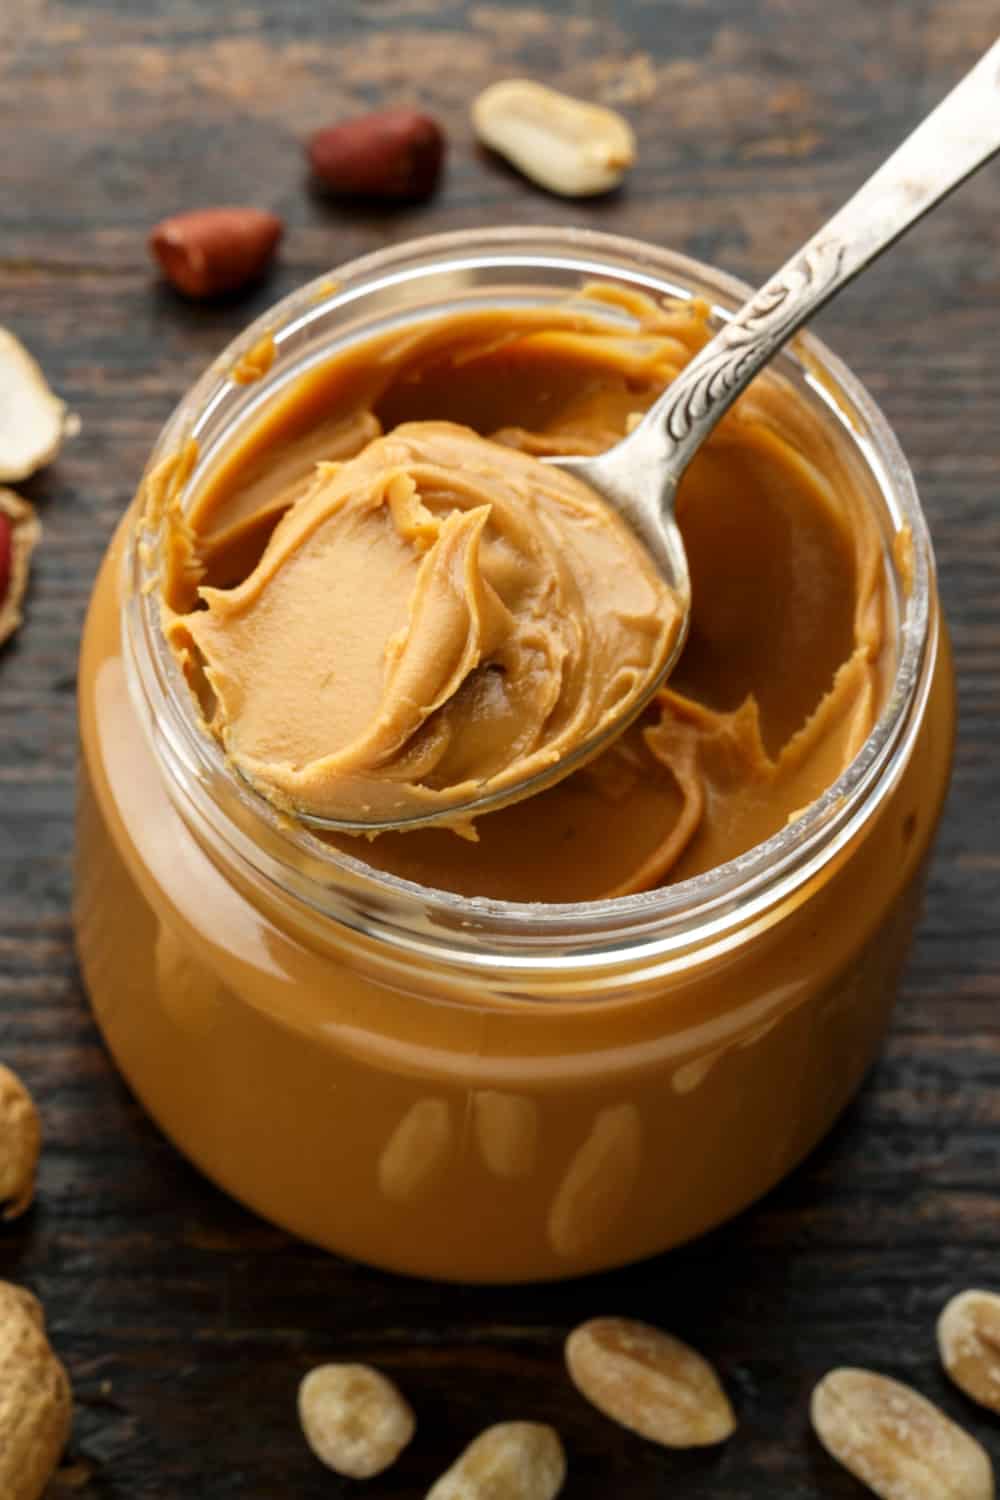 Does Peanut Butter Go Bad